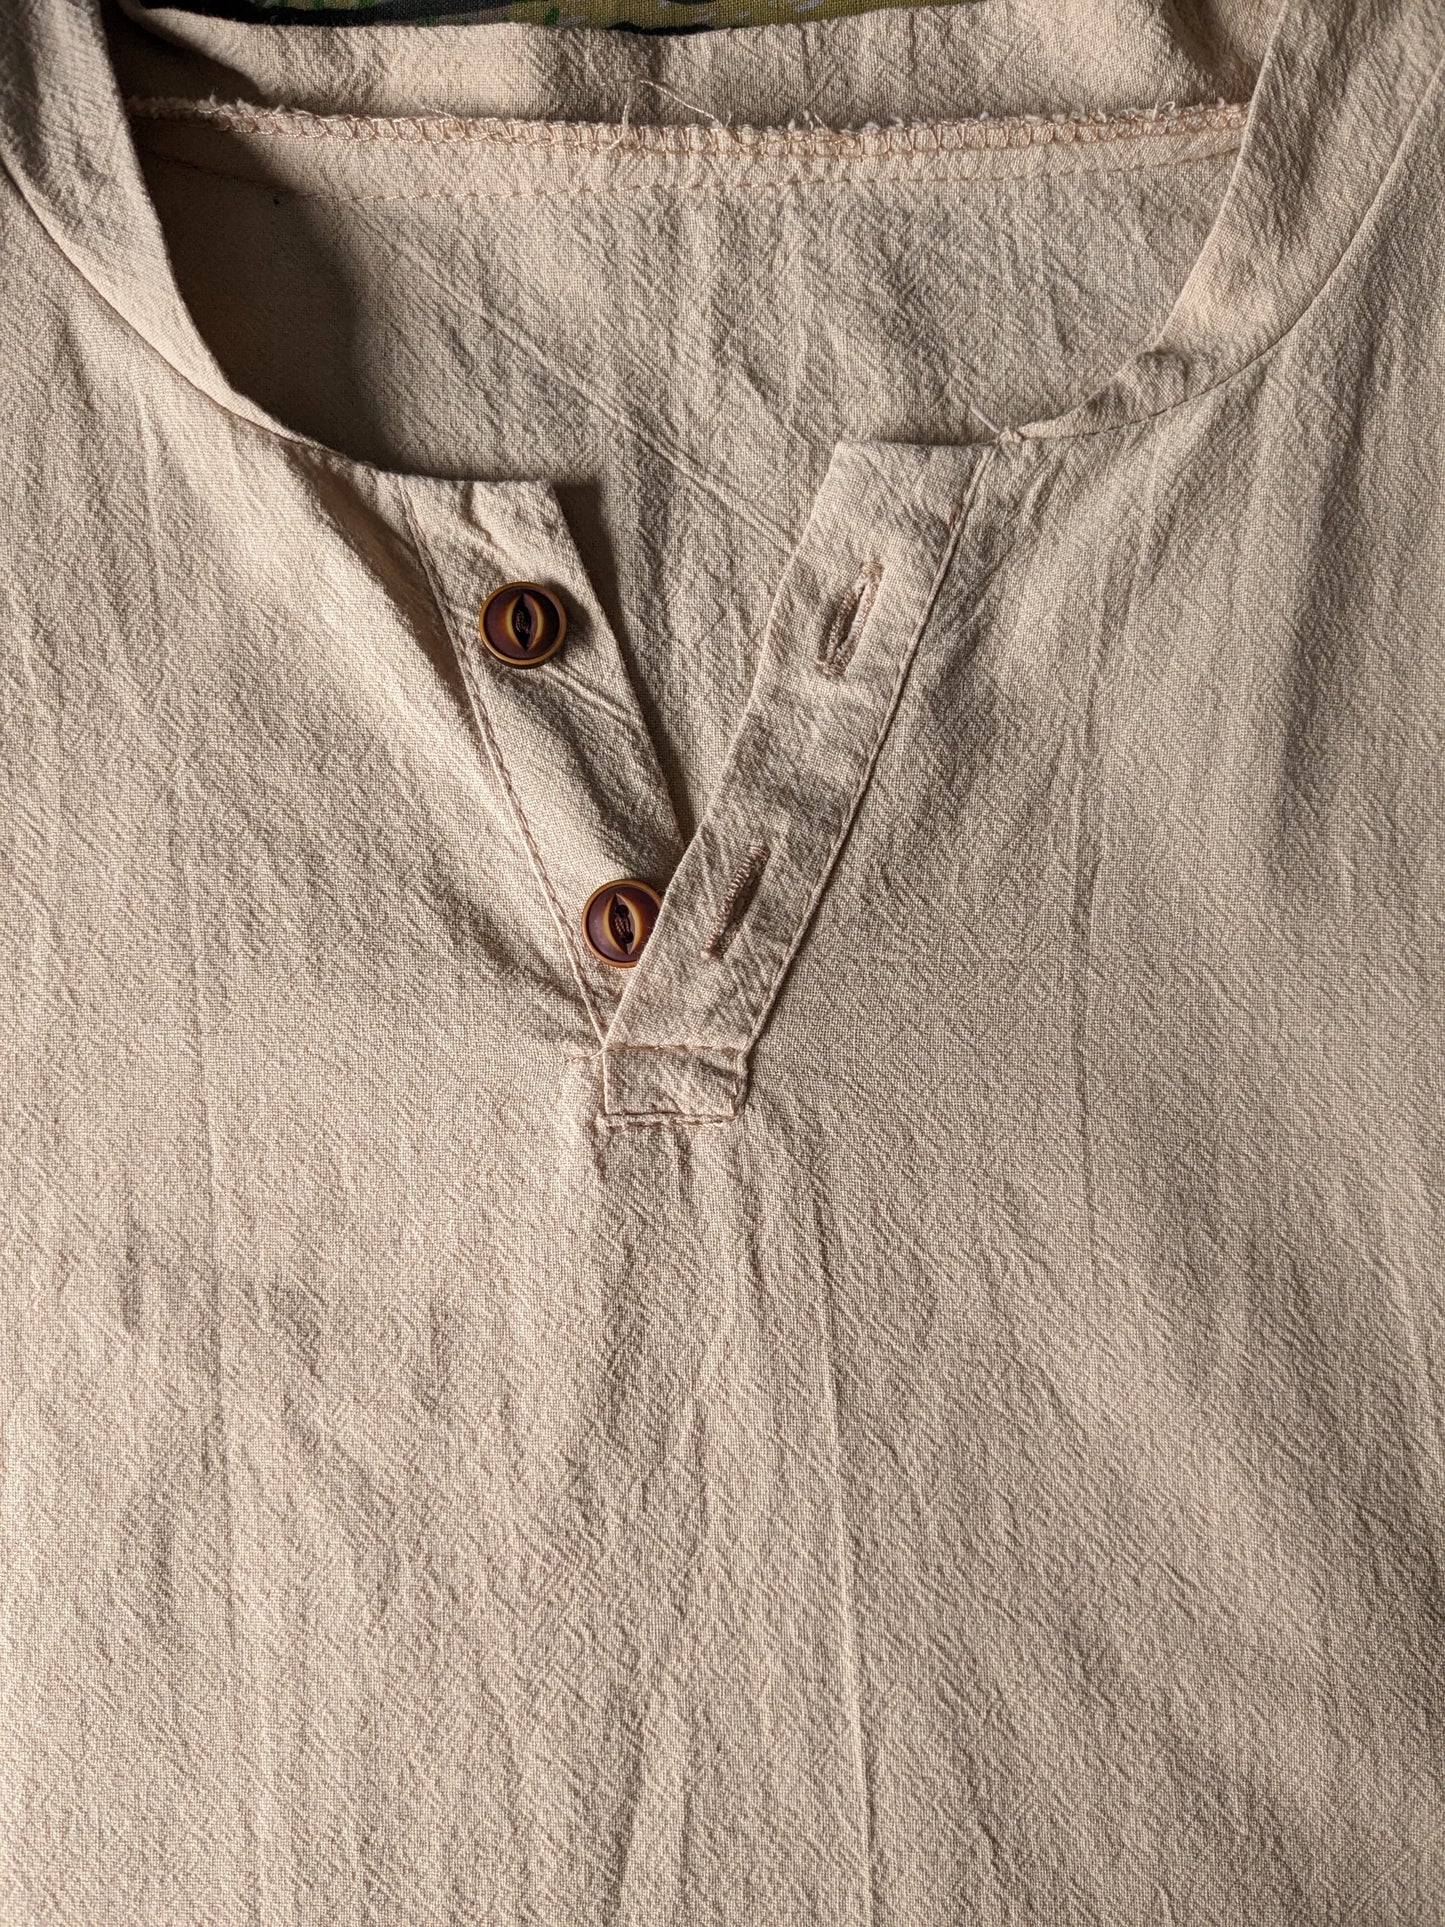 Vintage shirt / polo with mao / raised collar and buttons. Beige. Size L.